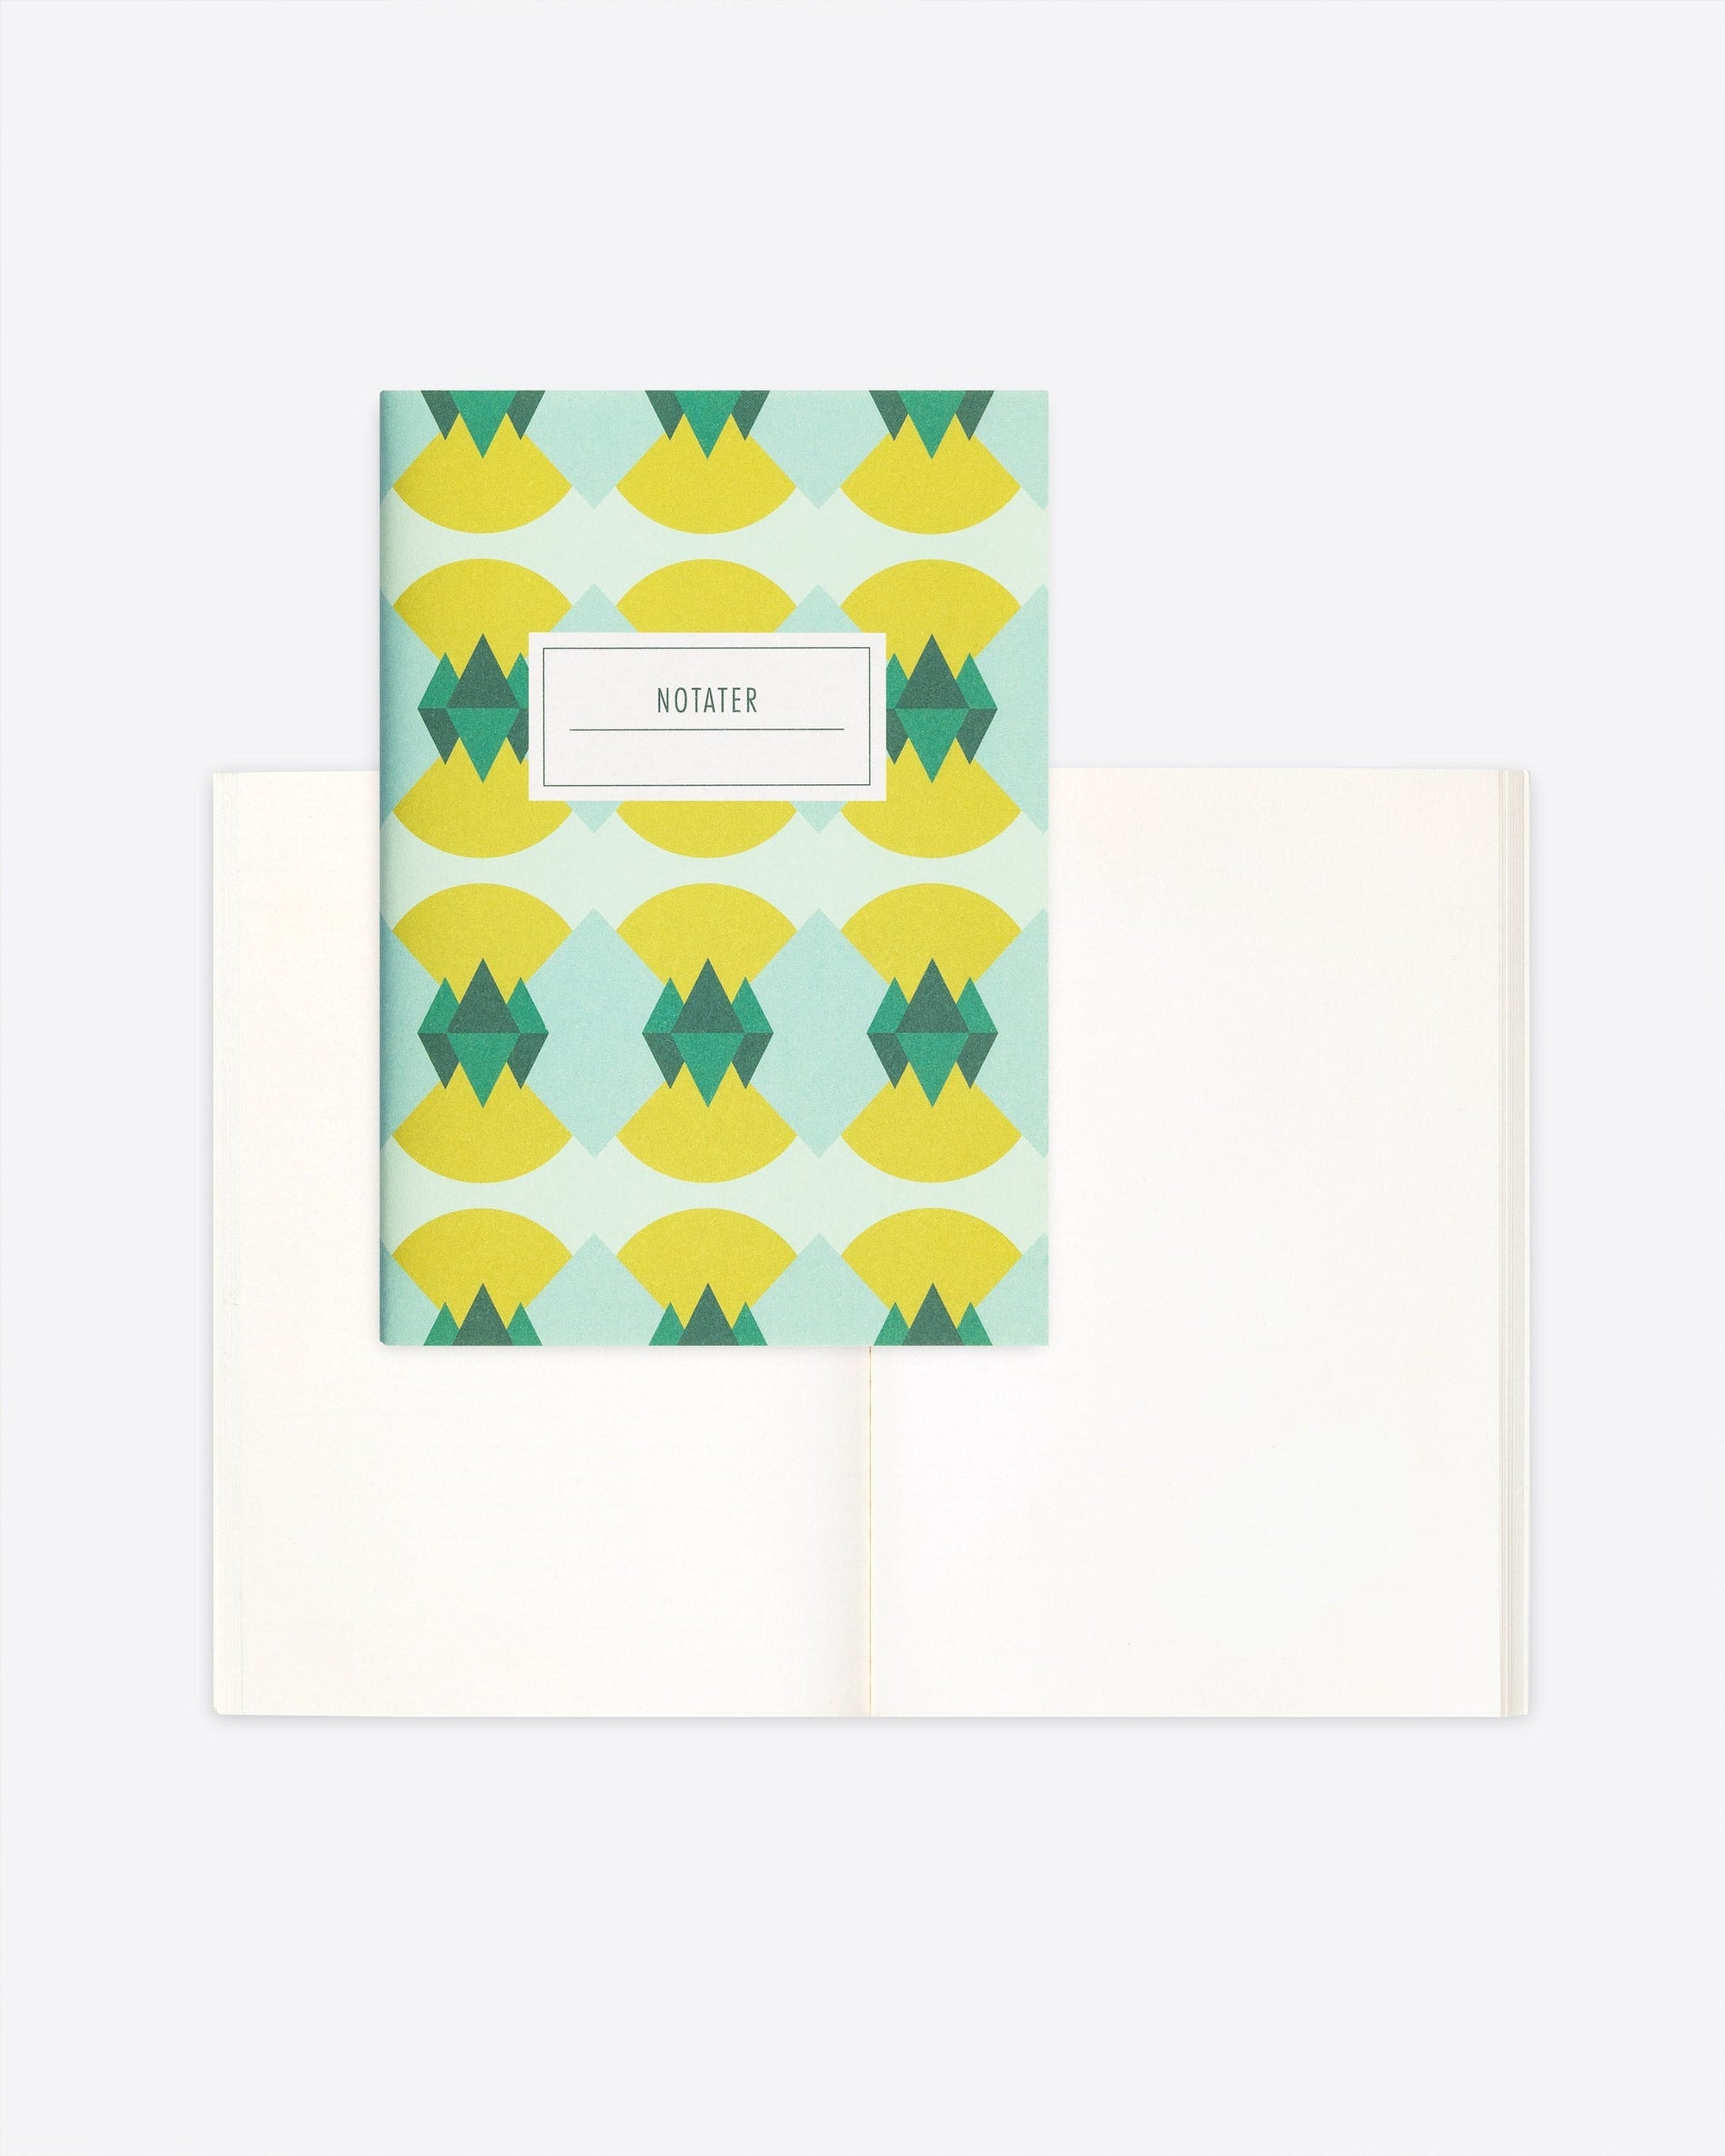 Notebook with dust jacket